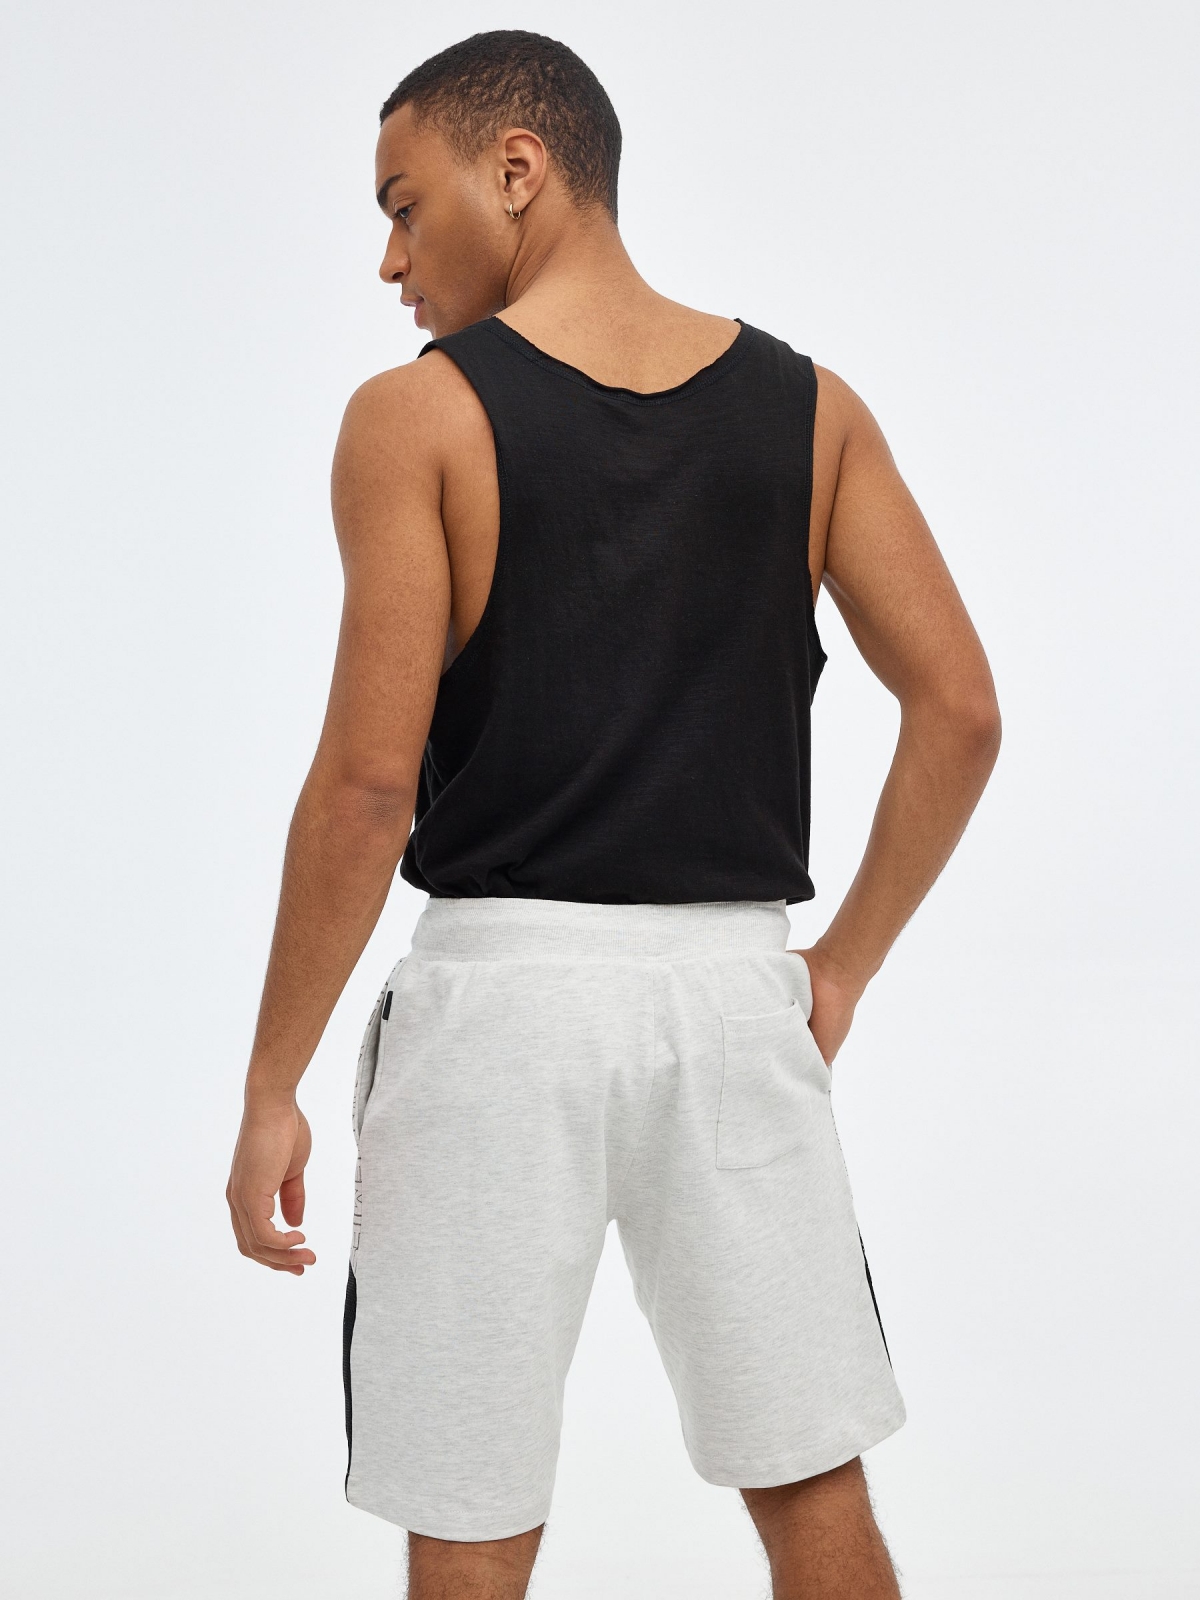 Bermuda jogger shorts with side band light grey vigore middle back view